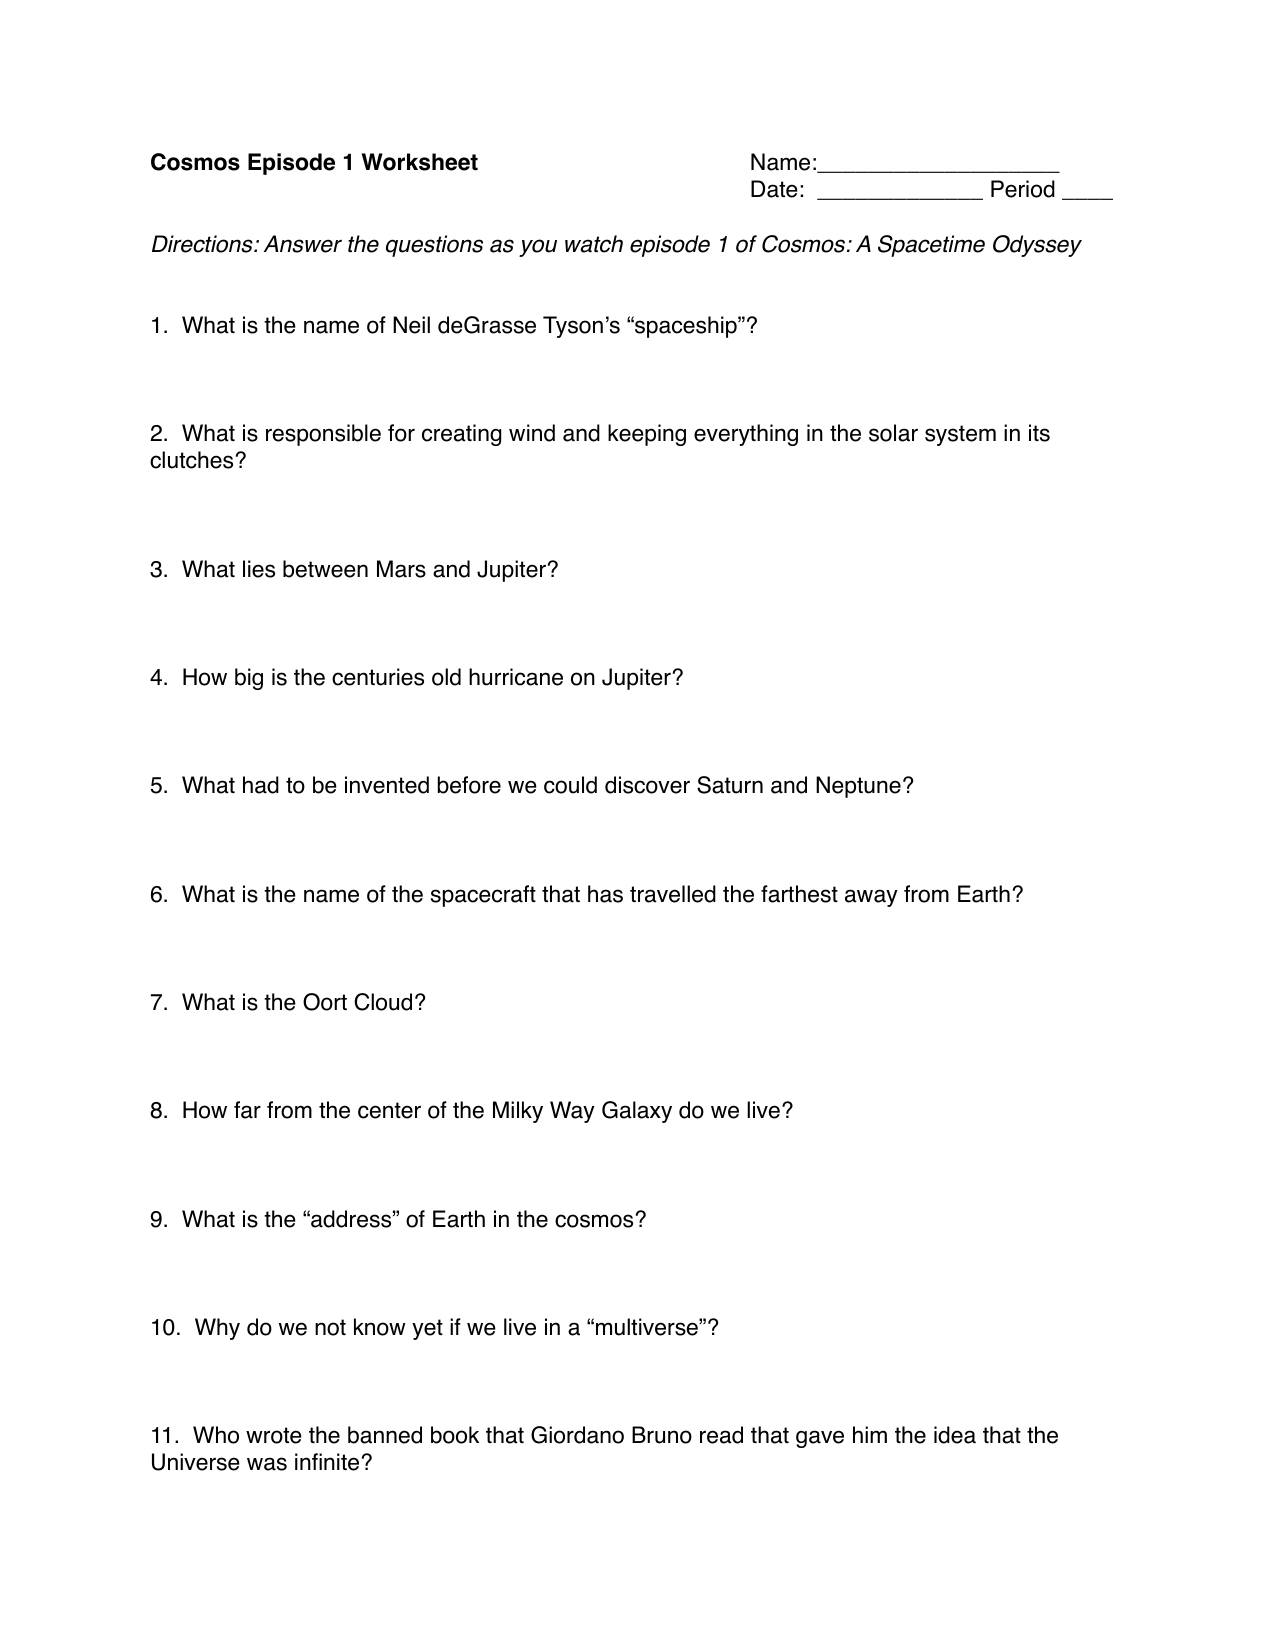 Cosmos Episode 20 In Cosmos Episode 1 Worksheet Answers